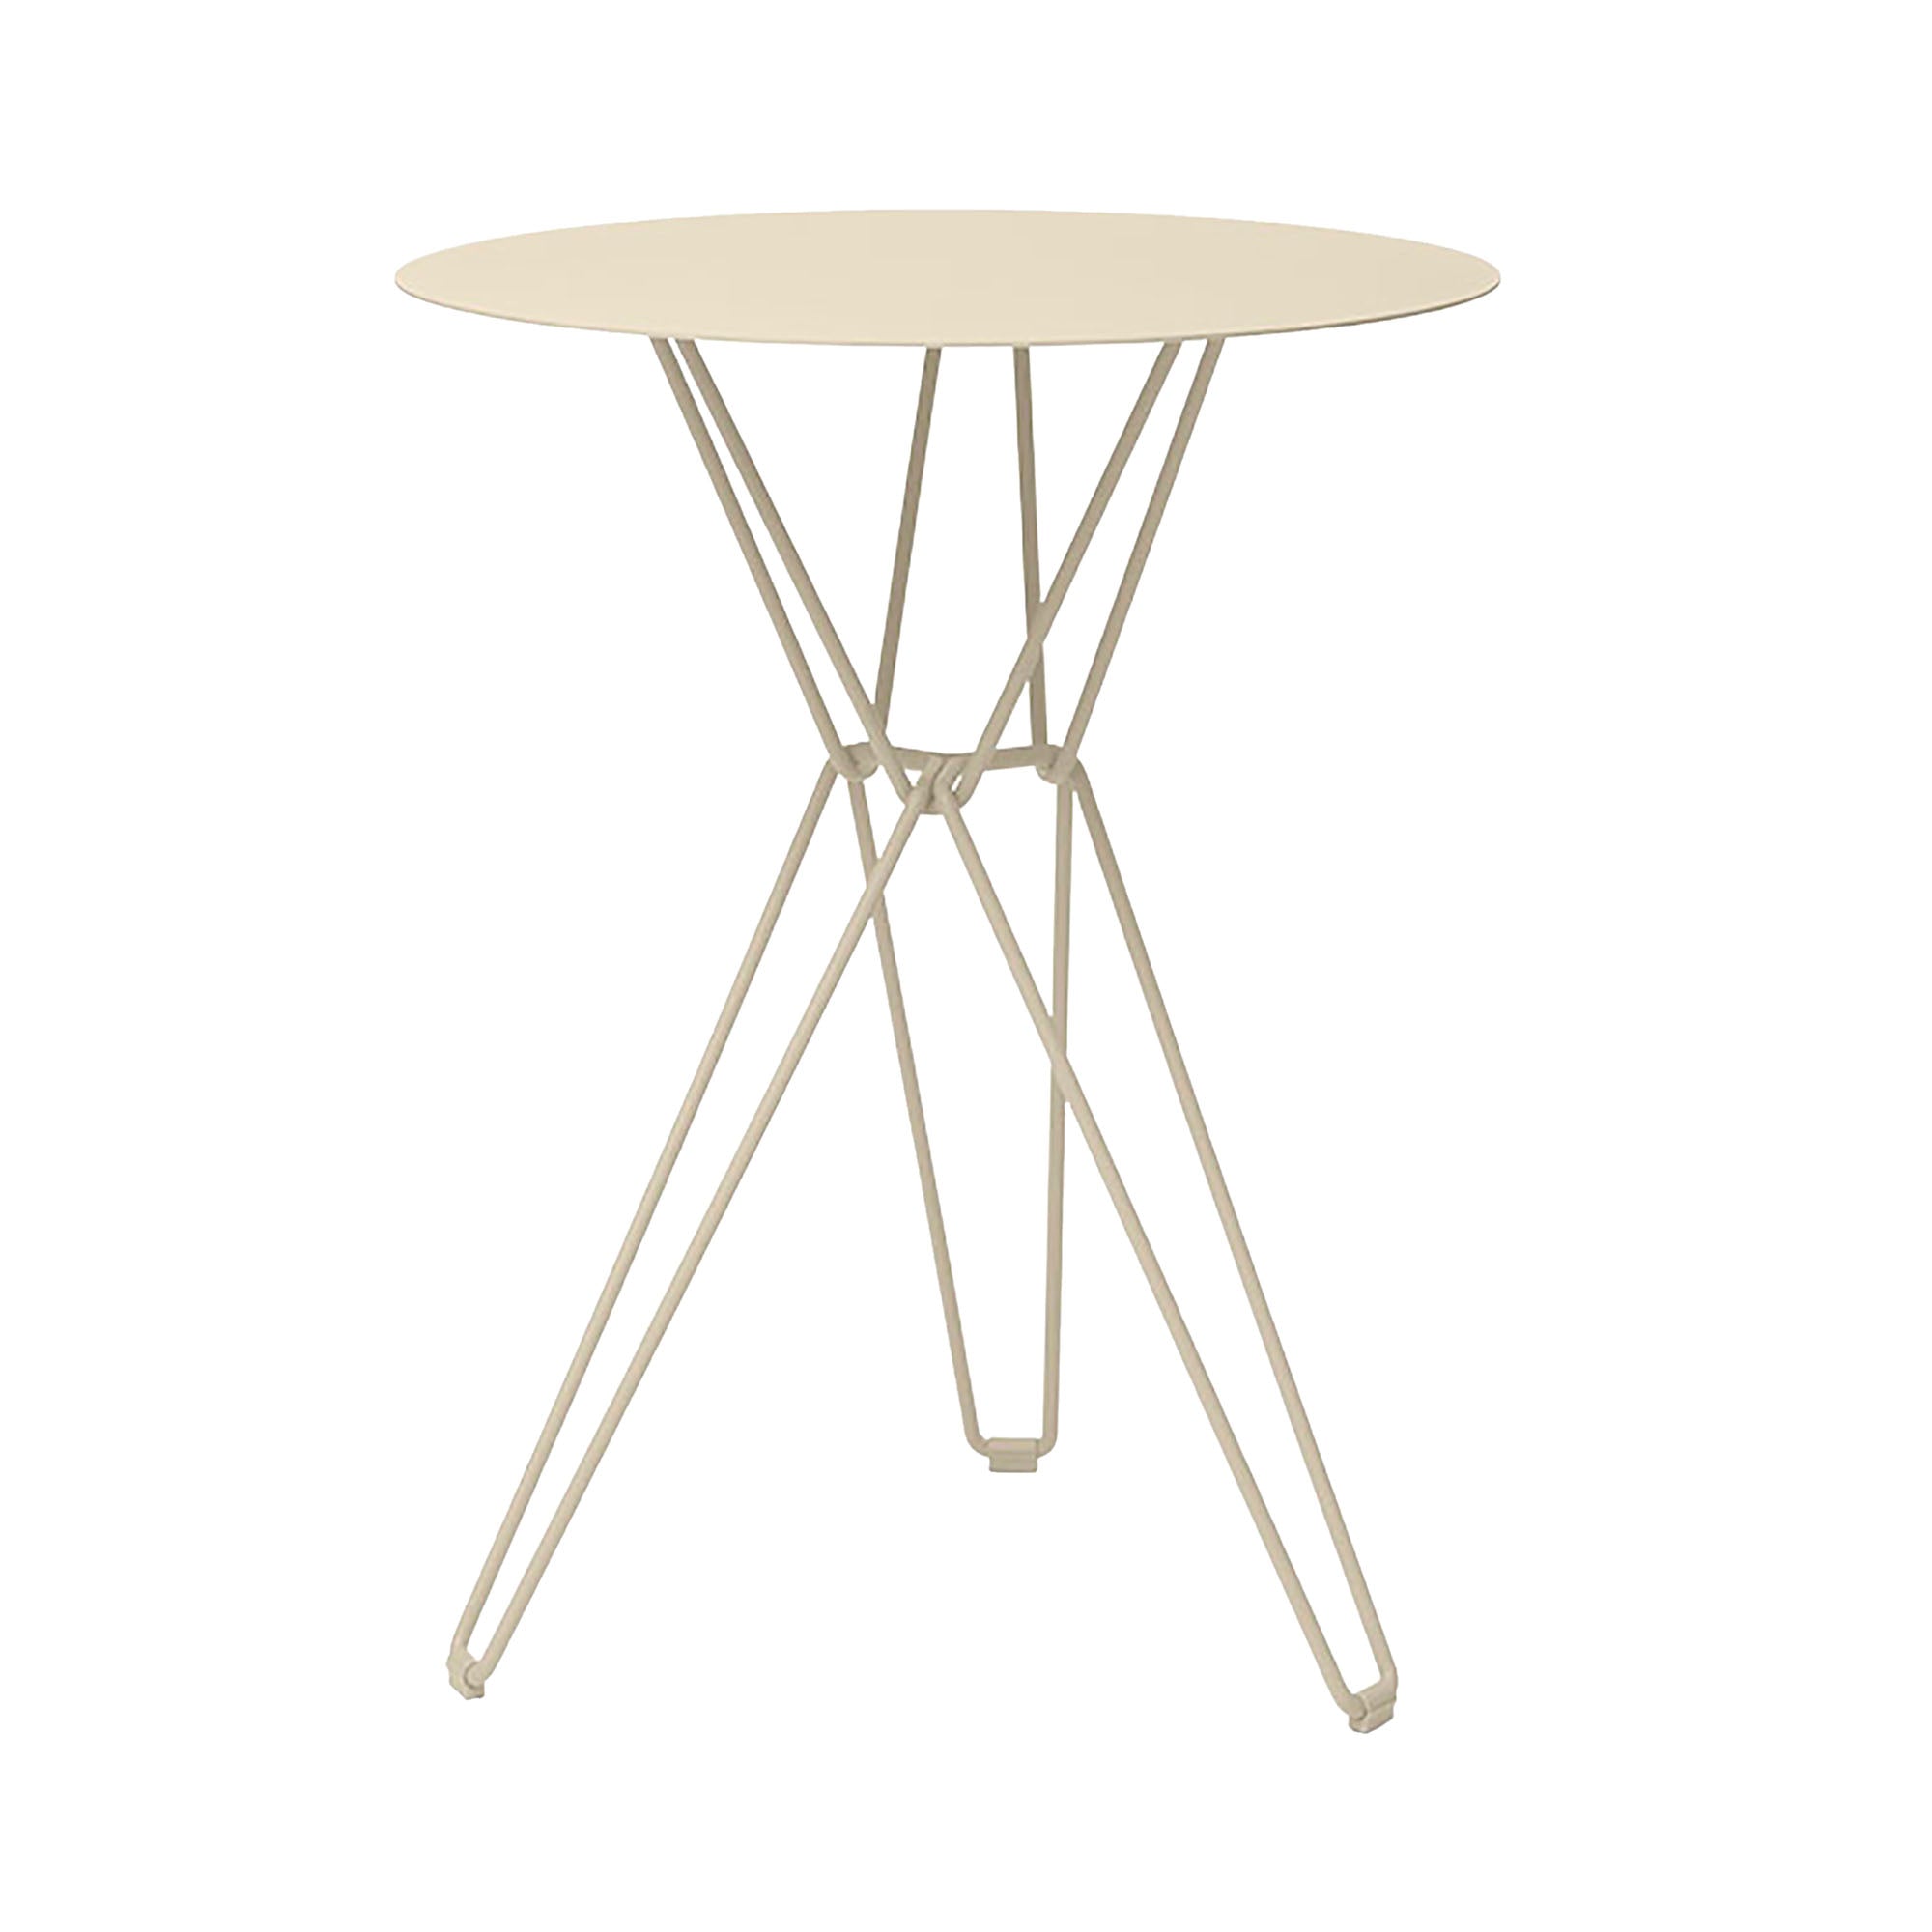 Tio Coffee Table: Round + Small - 23.6